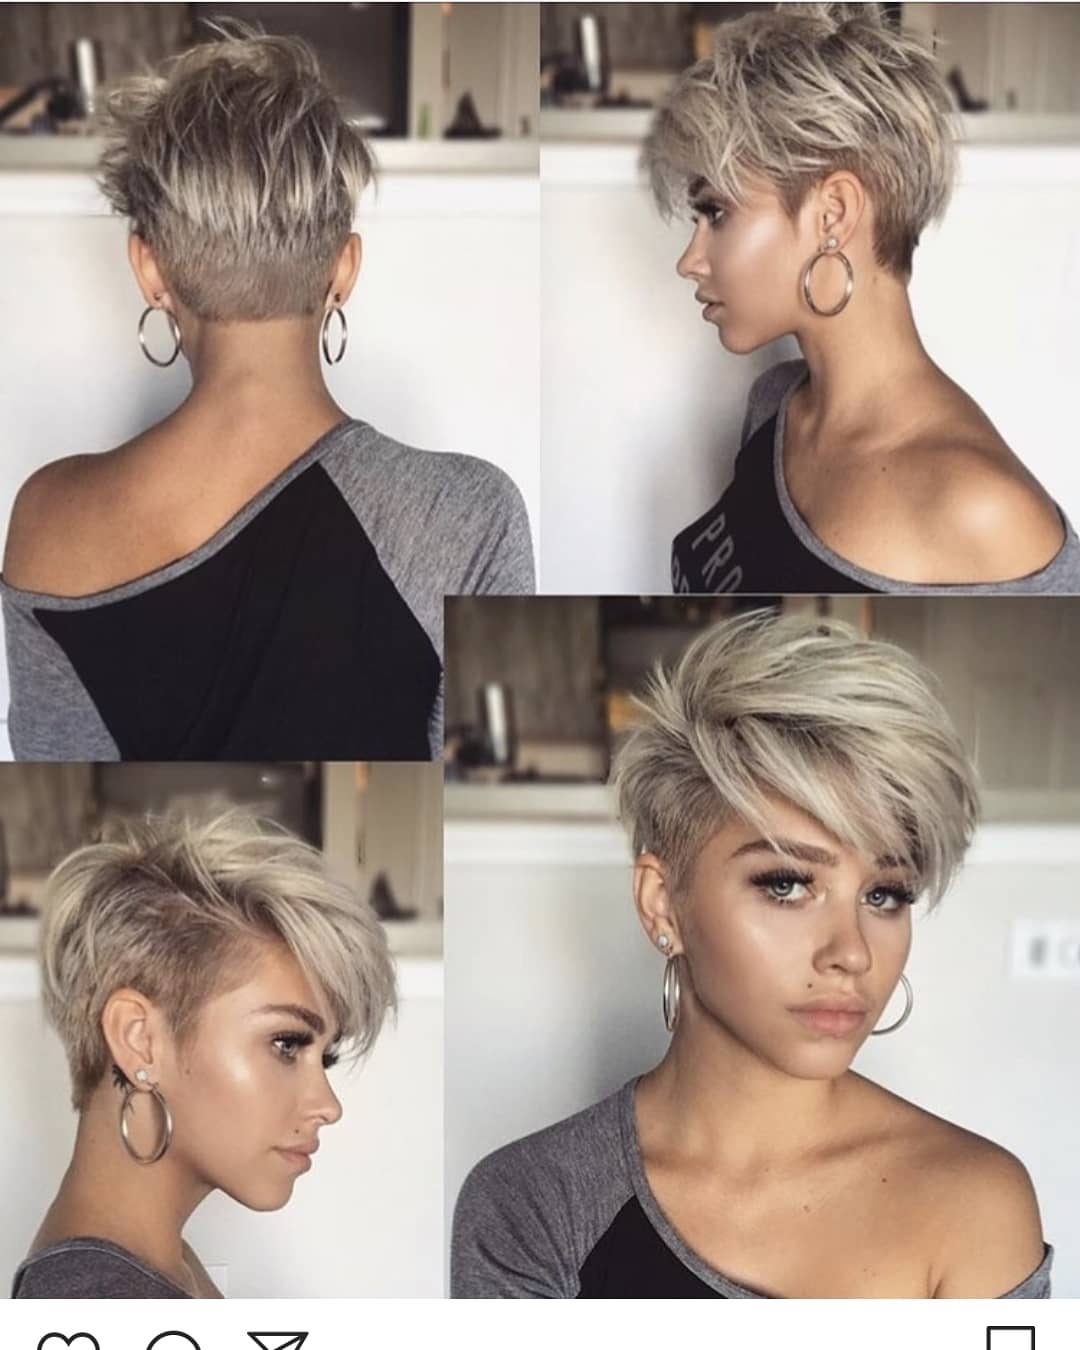 10 Pixie Haircut Inspiration Latest Short Hair Styles For